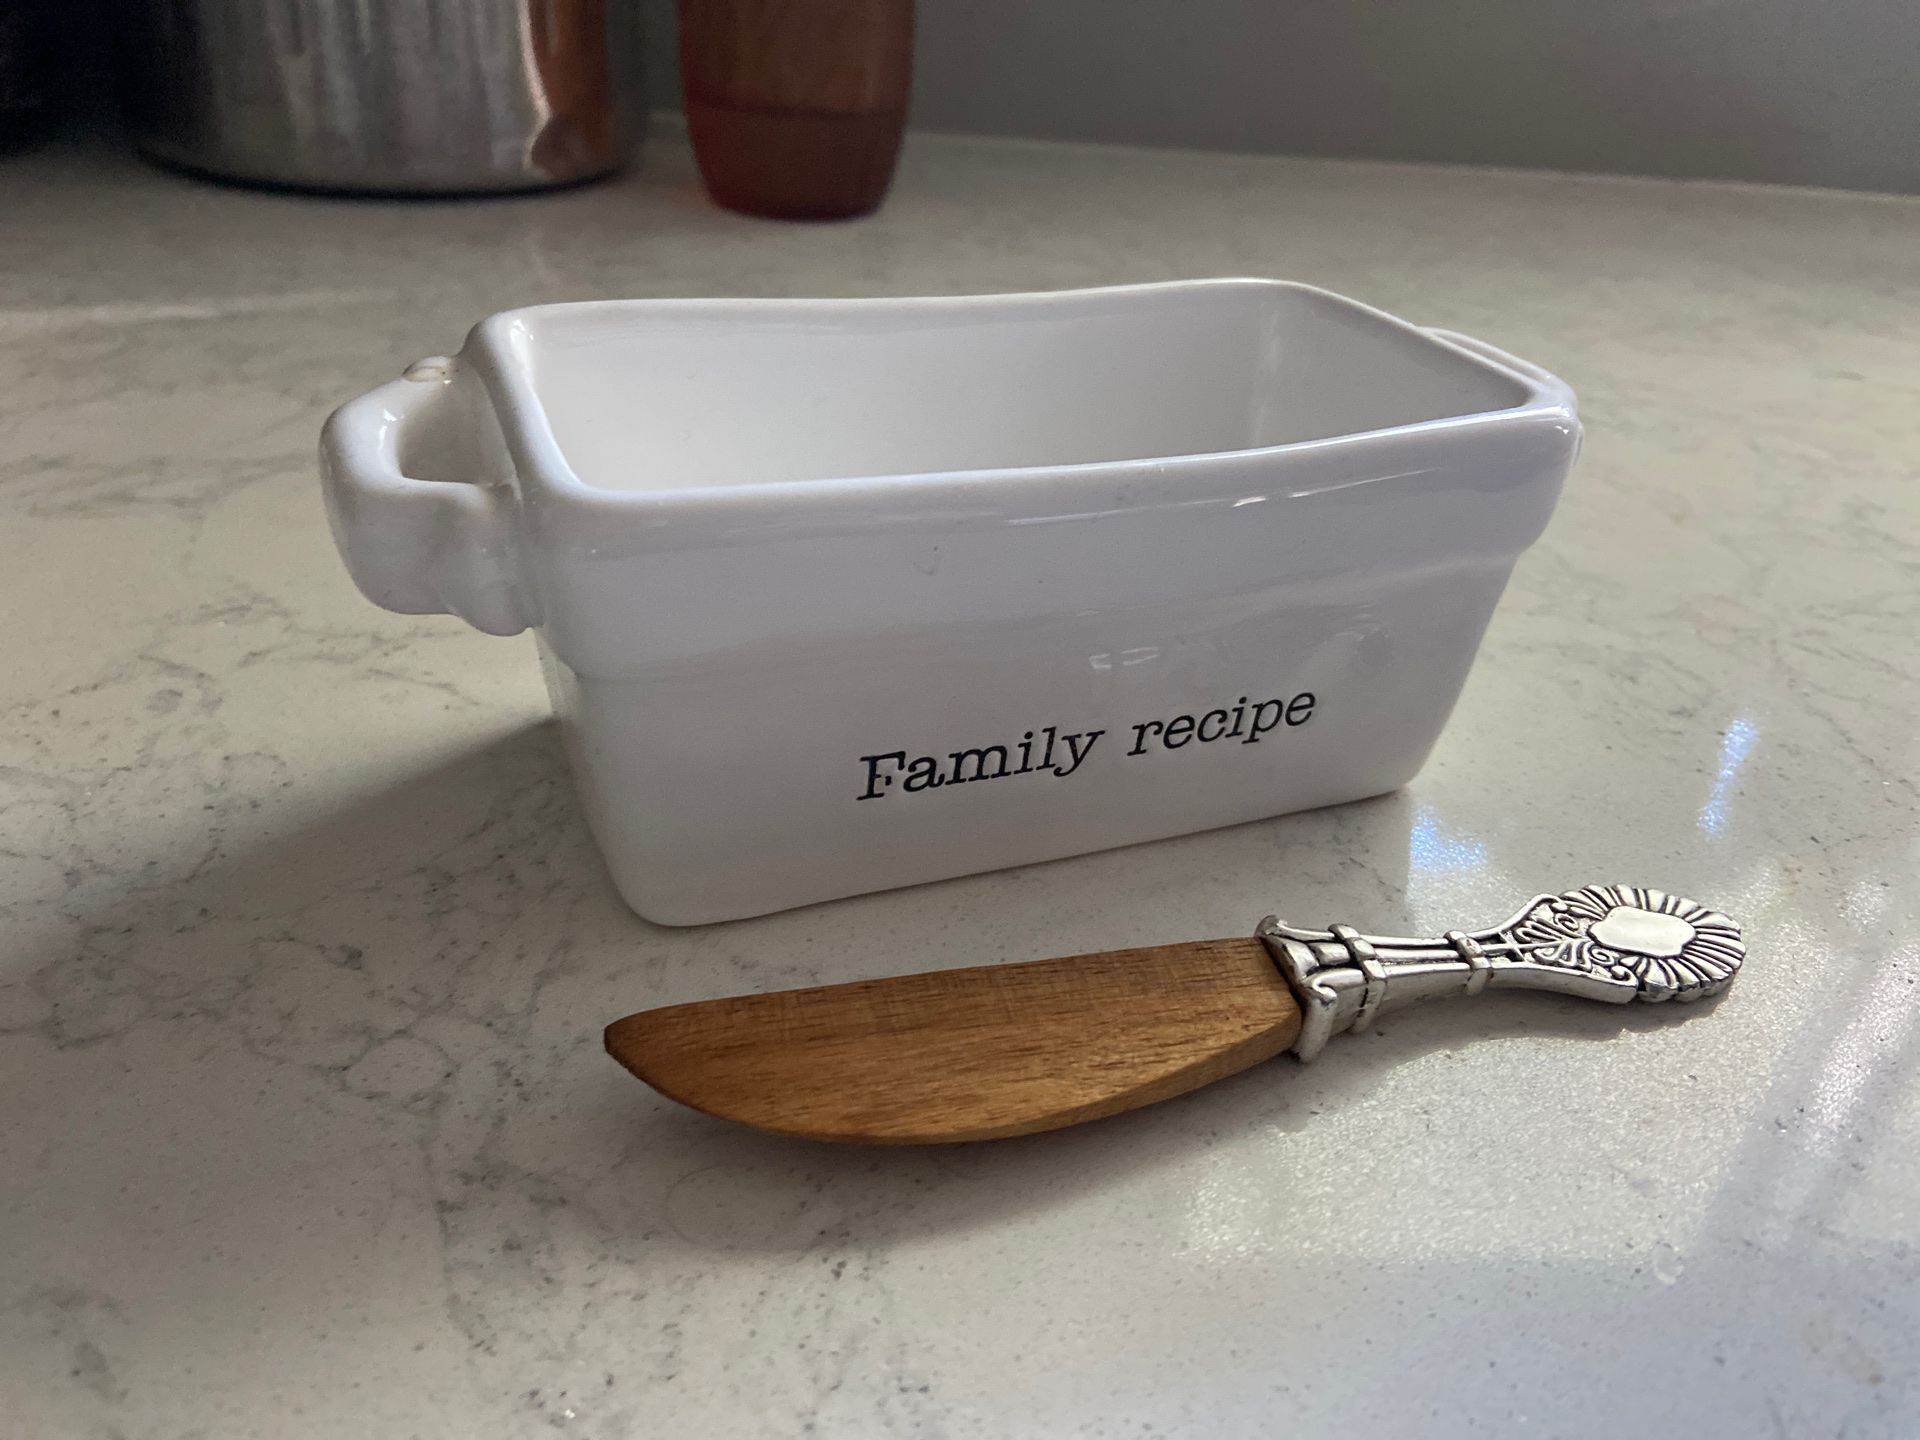 Mud Pie “Family Recipe” Butter Dish with spreading knife